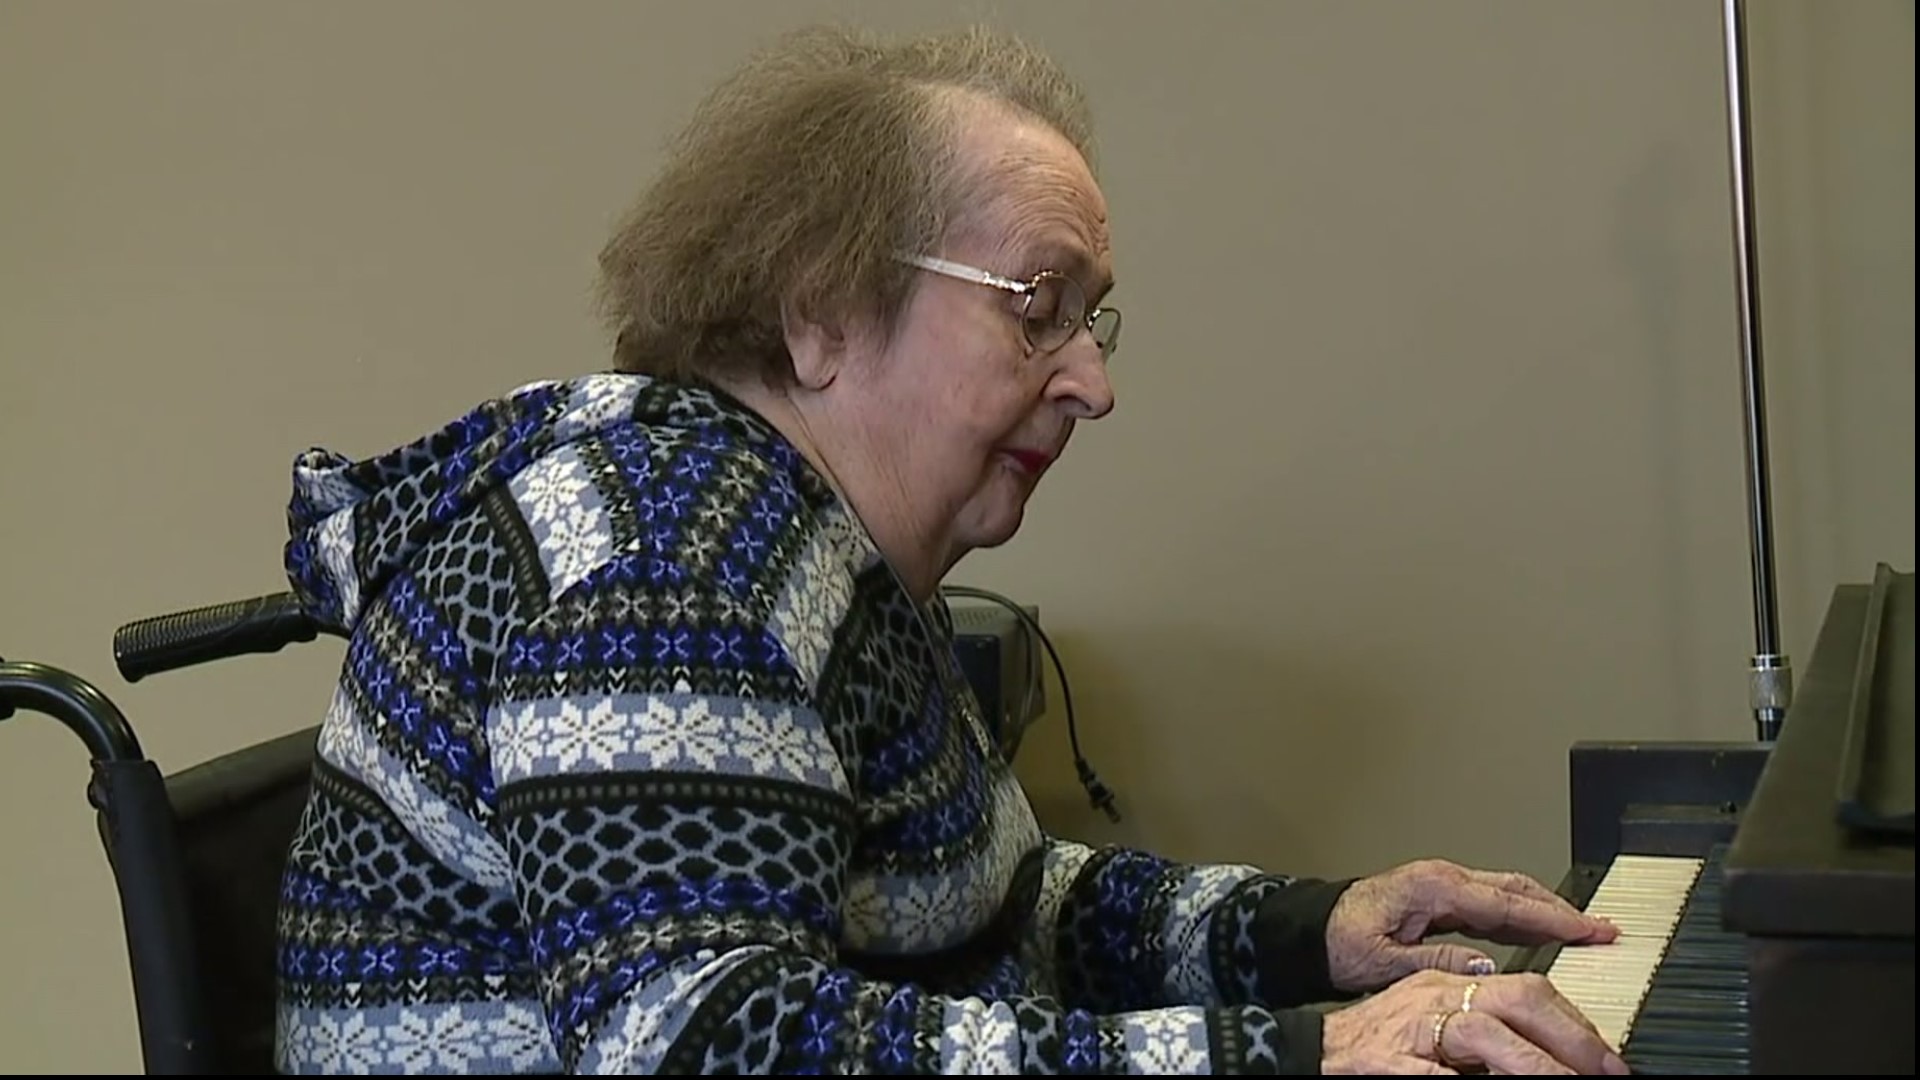 It's been more than 80 years since she taught herself how to play the piano, and now she shares her talent with fellow nursing center residents.